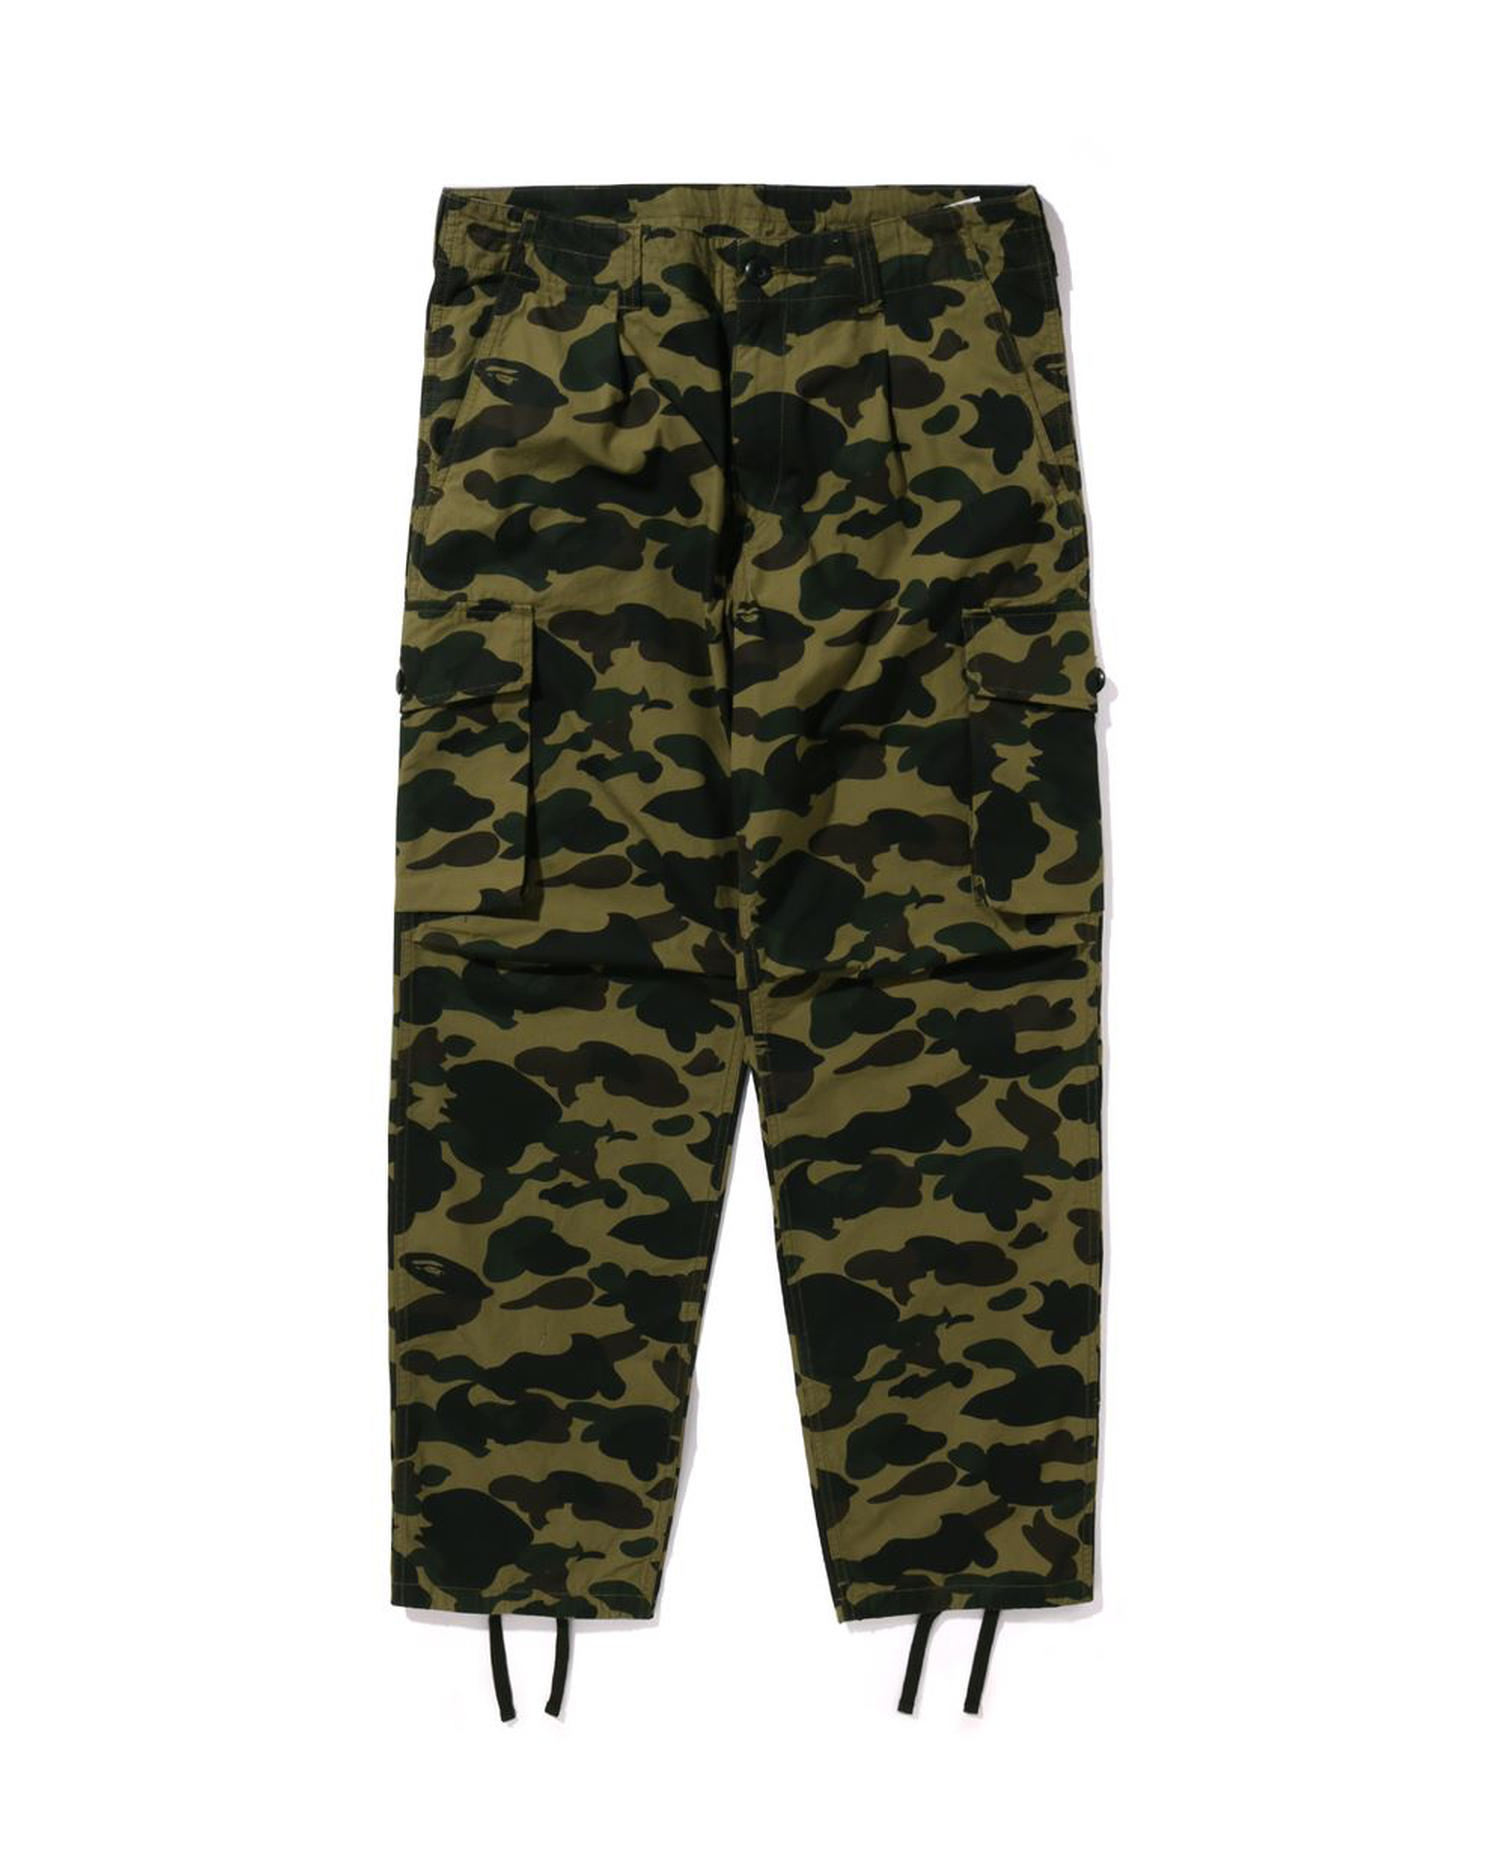 Designer Camo Ruffles Pants For Women Stretchy, Loose Fit Camouflage  Trousers Women For Spring/Summer 2023 Streetwear Wholesale Clothes Style  9752 From Sell_clothing, $15.72 | DHgate.Com